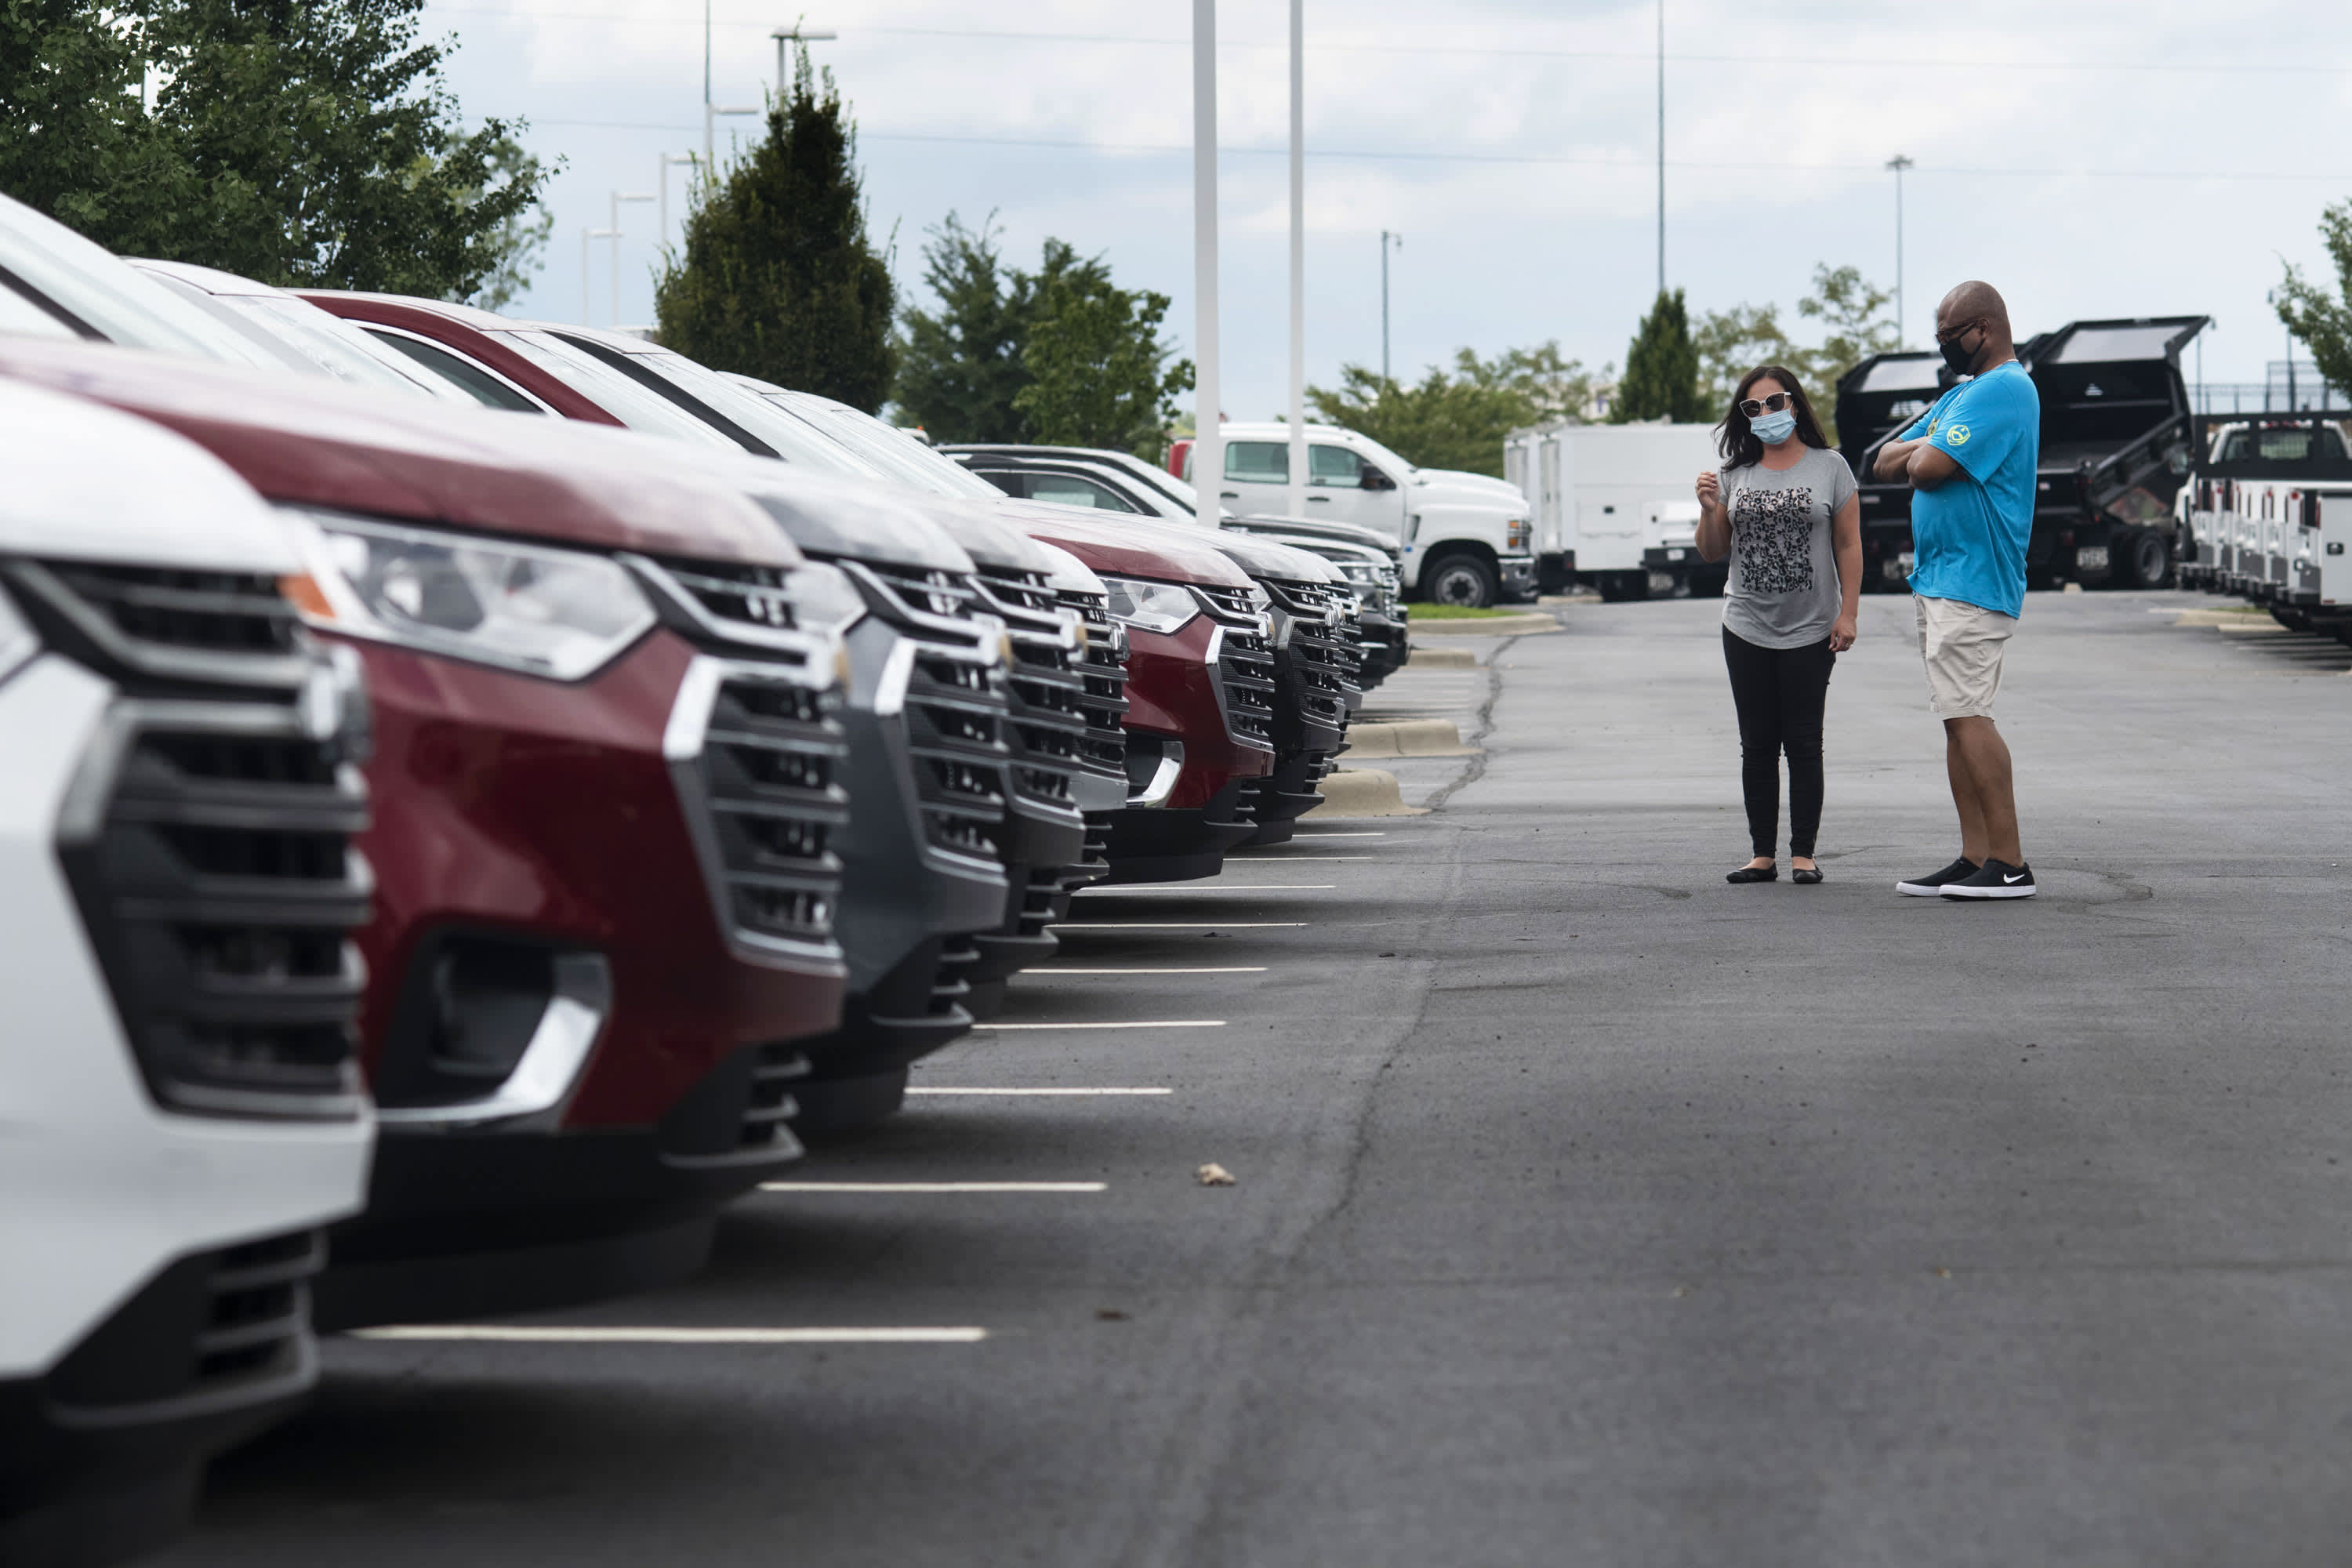 New or used car prices are rising as stocks decline this spring